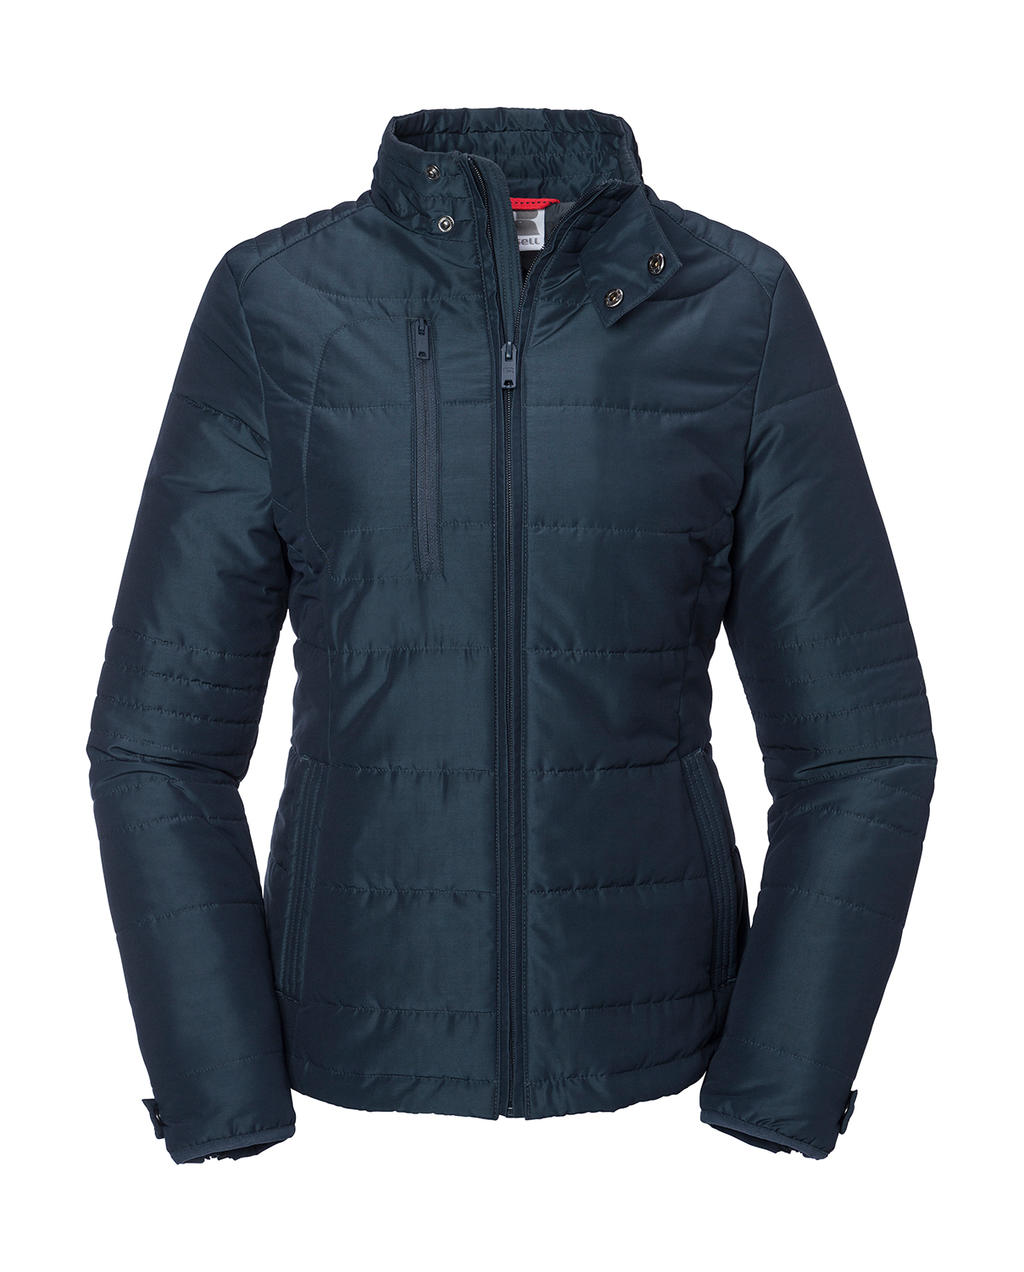  Ladies Cross Jacket in Farbe French Navy